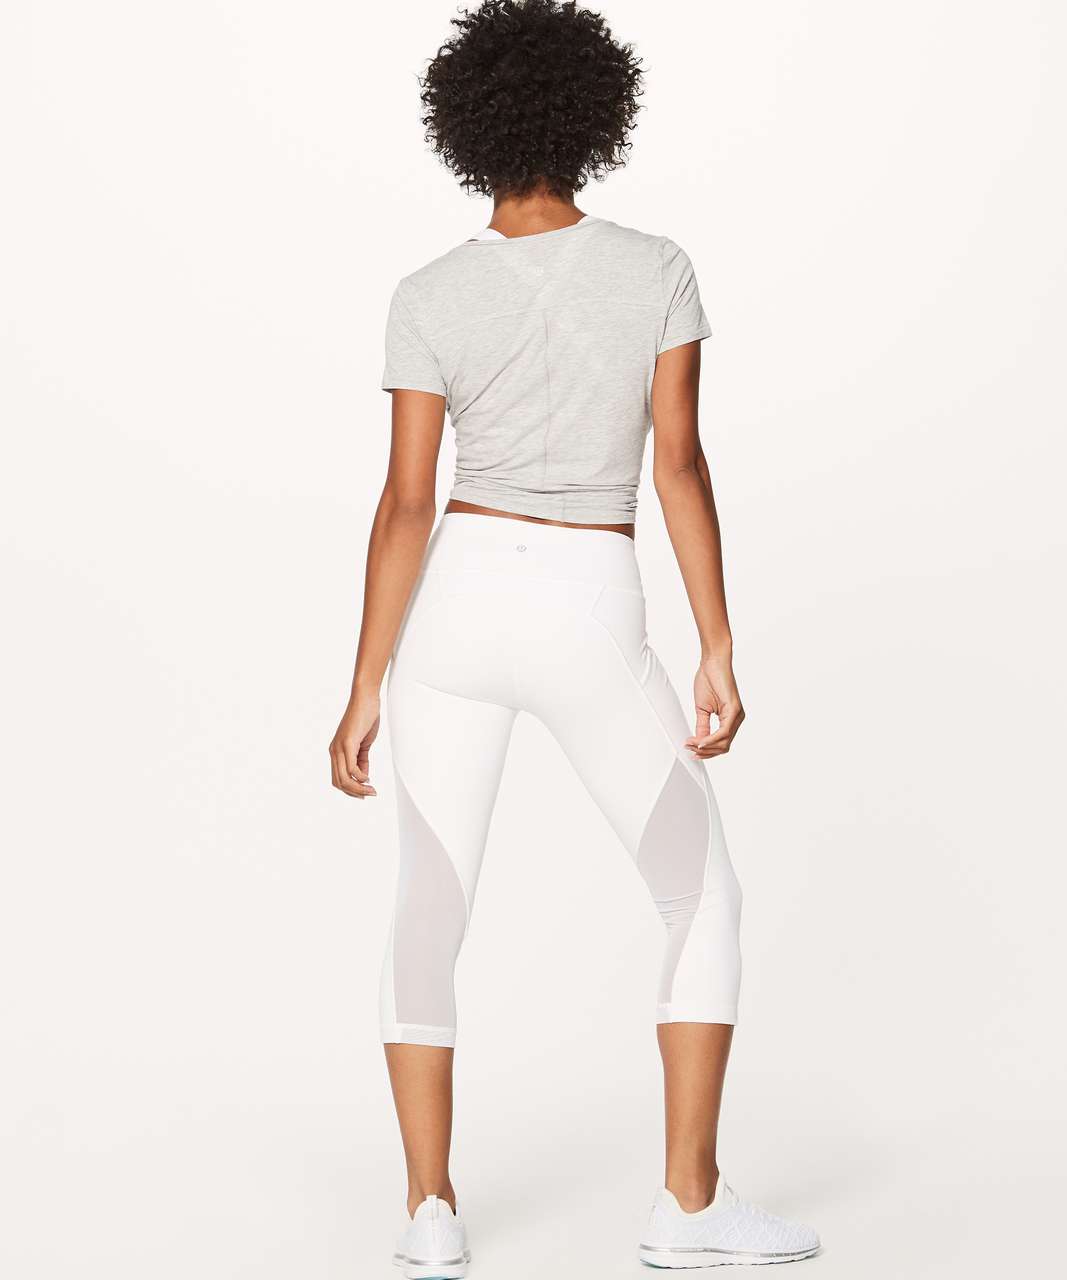 Lululemon Sweat Your Heart Out Crop (21 